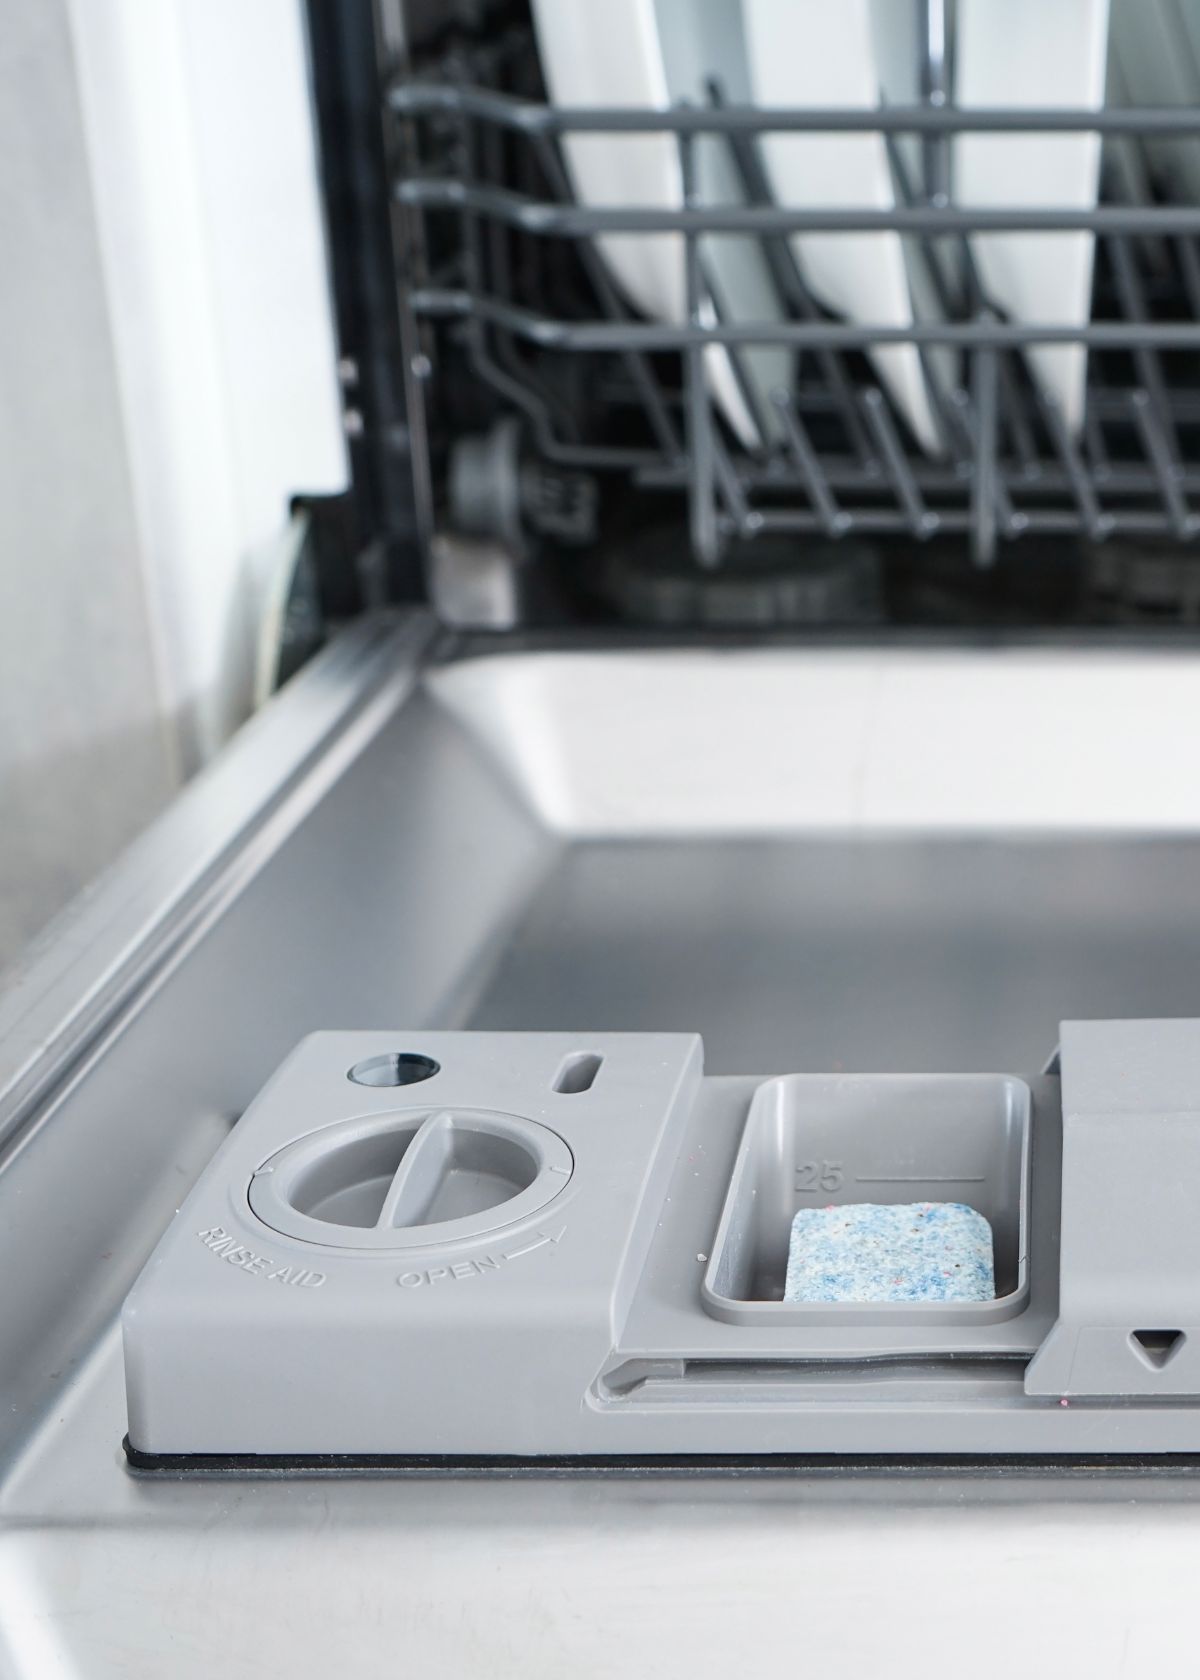 How to Use Dishwasher Pods